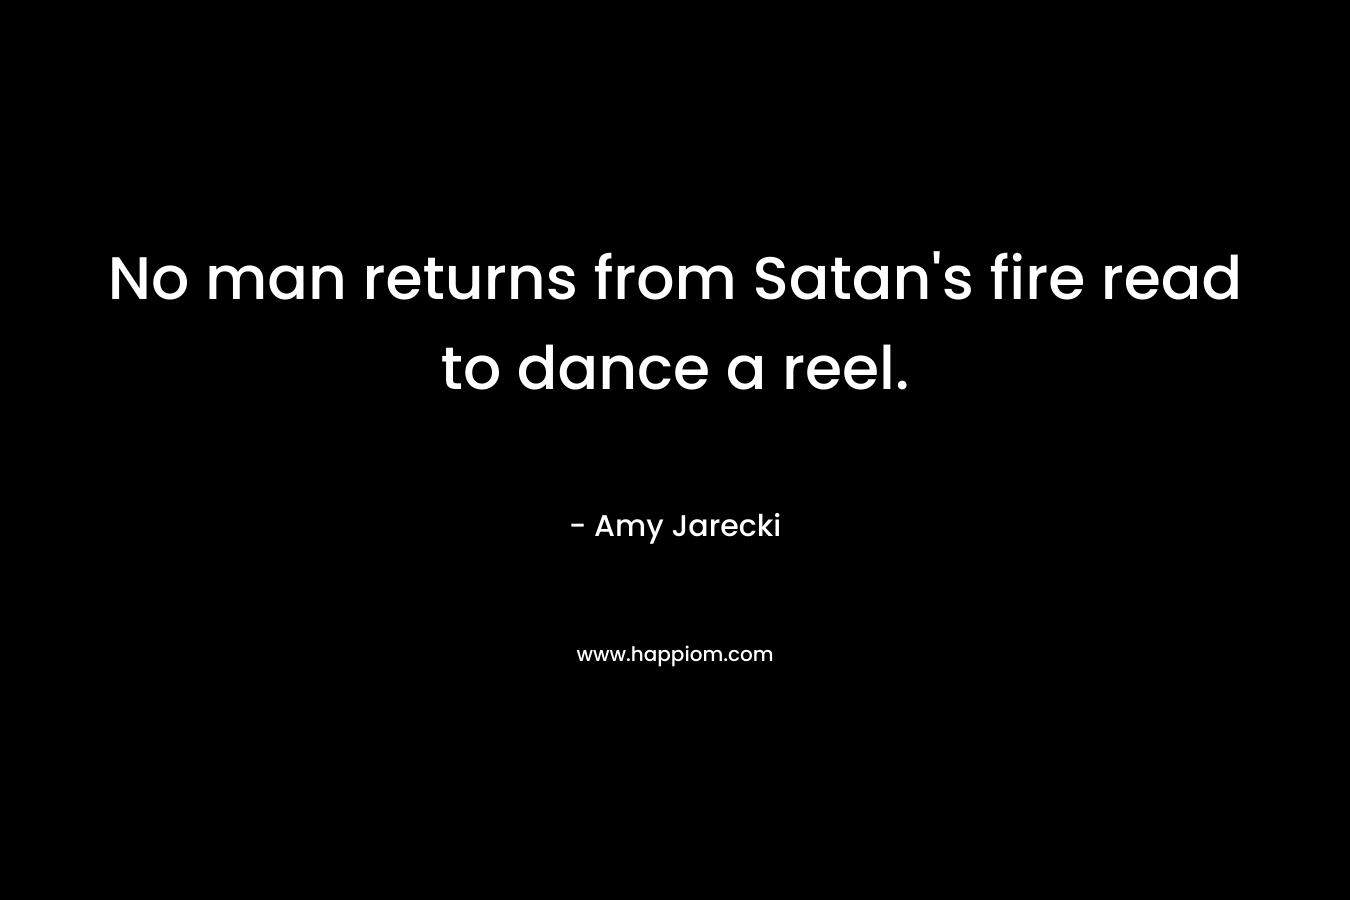 No man returns from Satan’s fire read to dance a reel. – Amy Jarecki